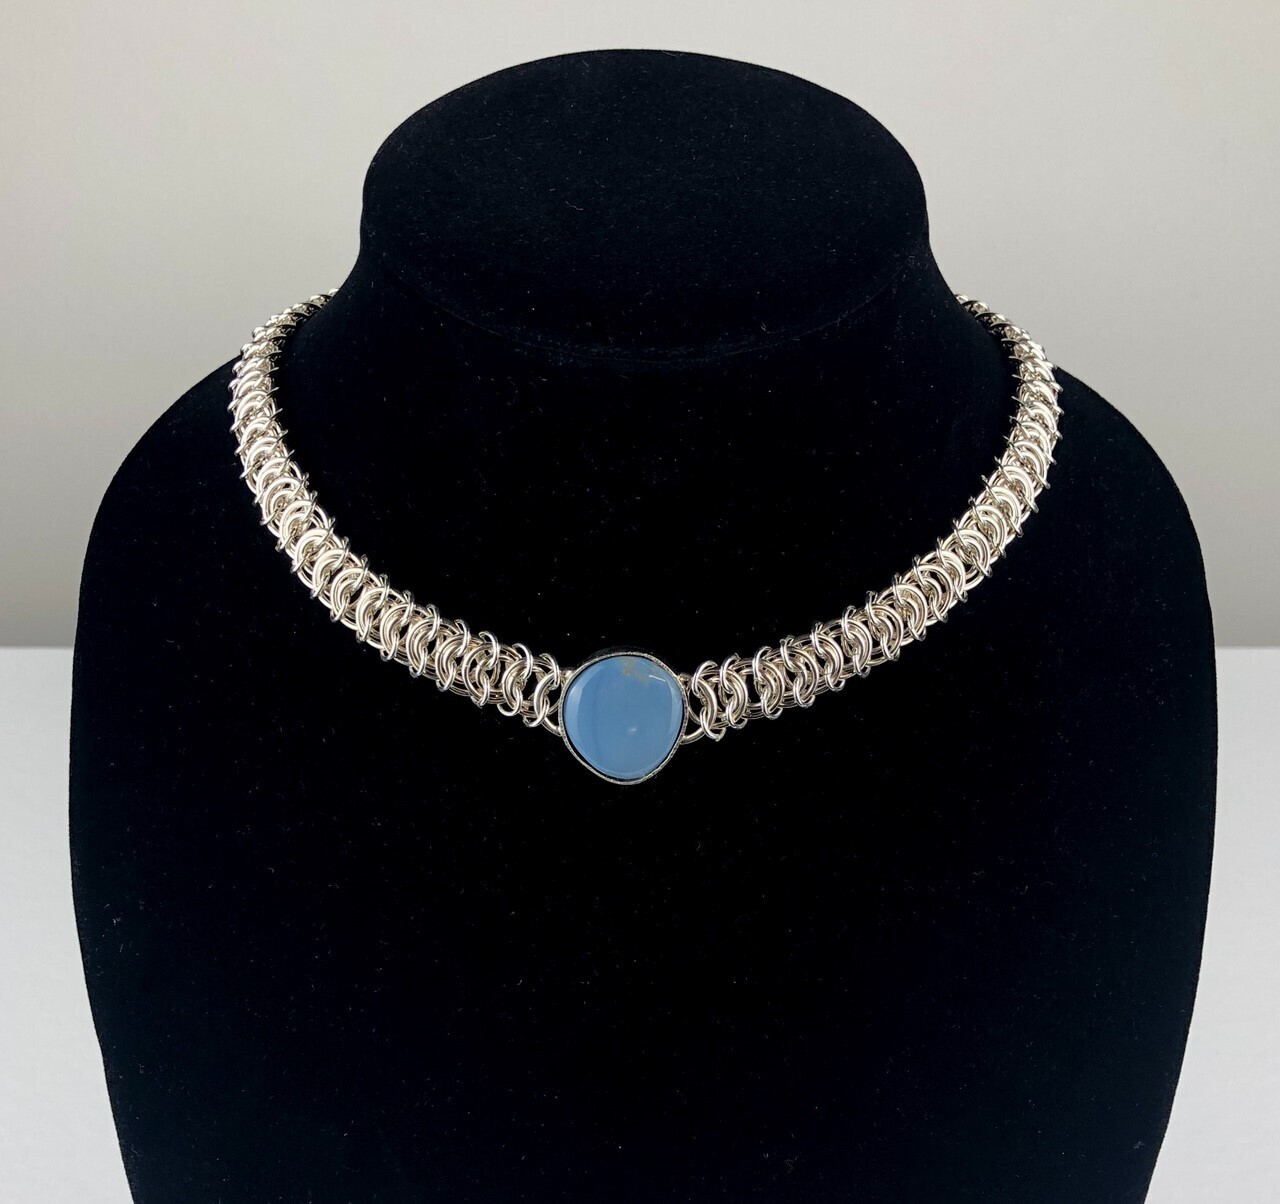 Vertebrae NECKLACE with Blue Owylee Opal Necklace